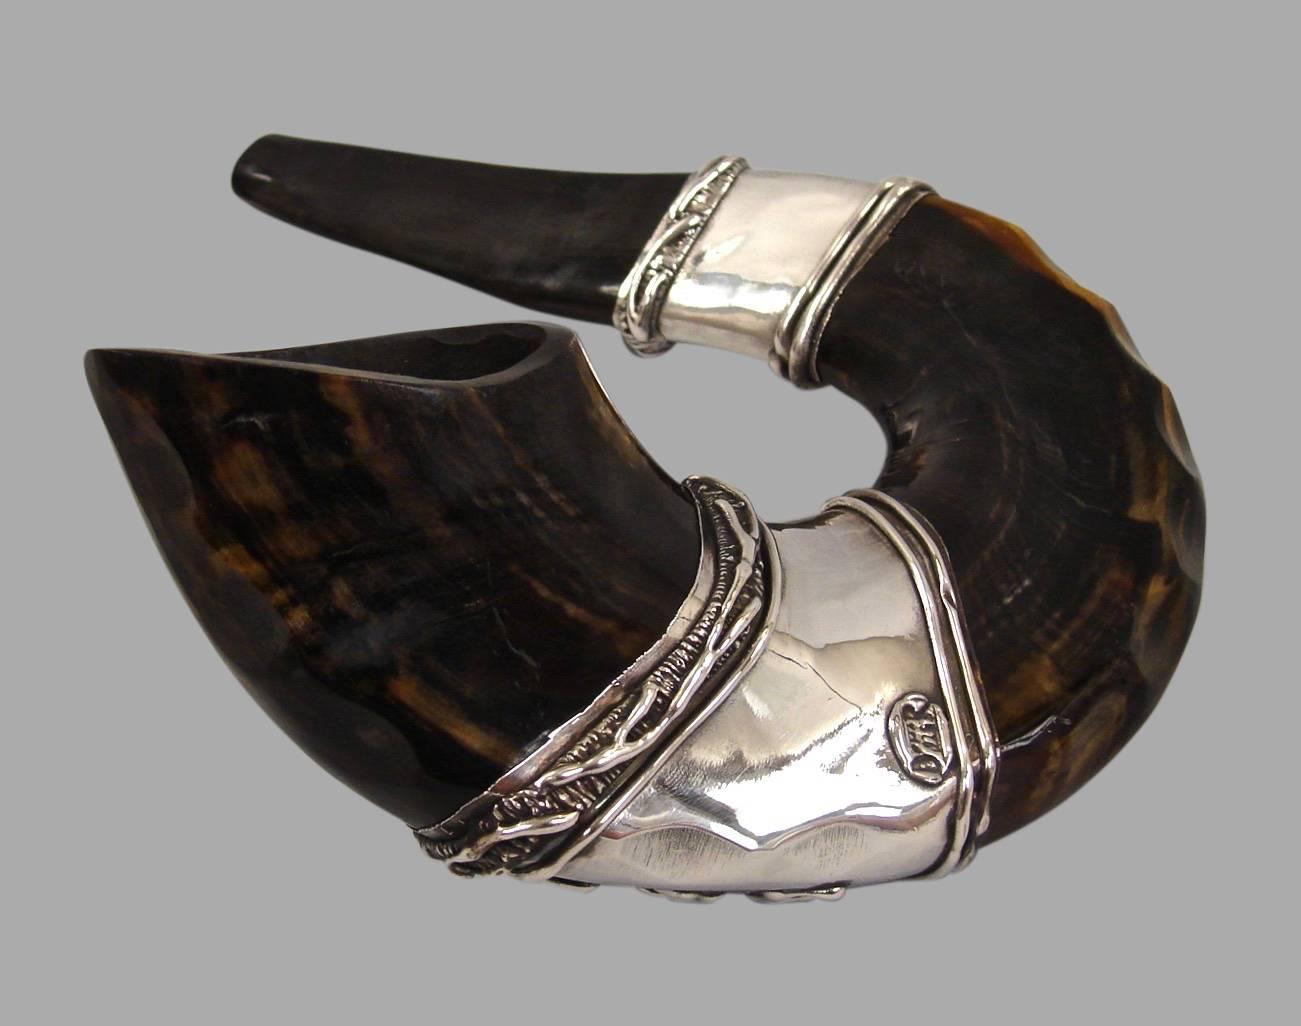 A polished ram's Horn shofar mounted with silver bands decorated with Hebrew letters and inset with hard stone. 20th century.